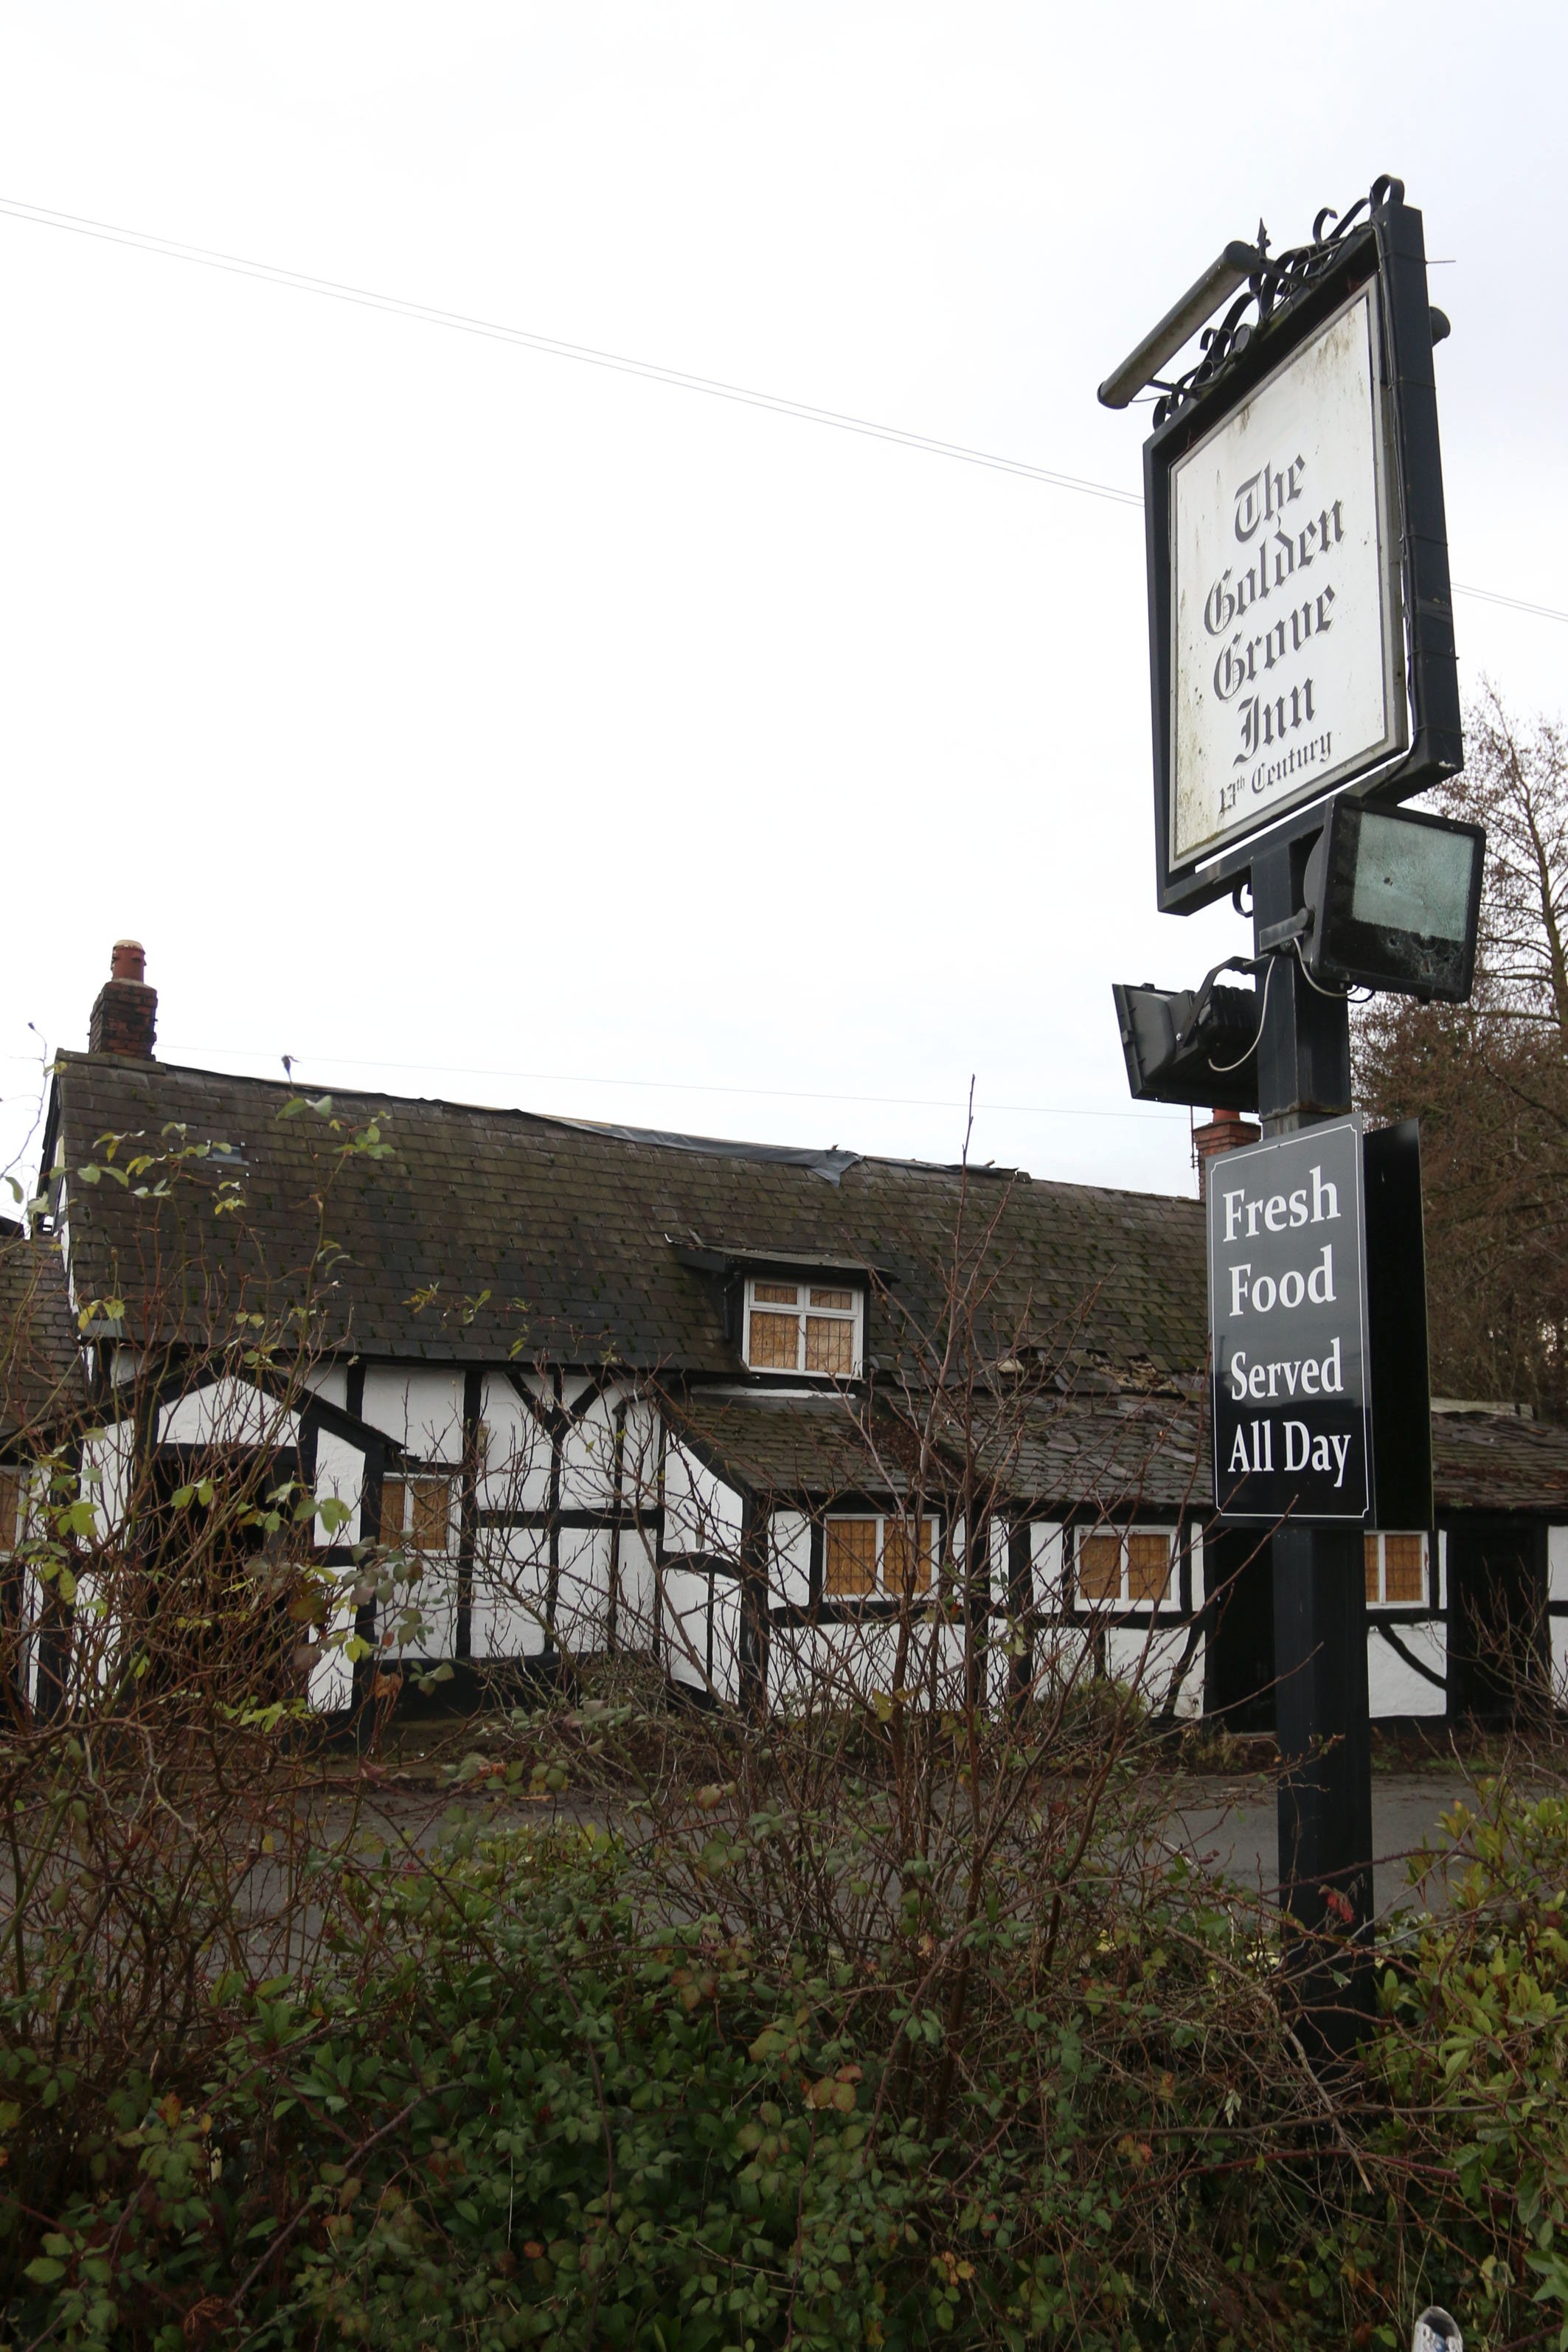 Did the Golden Grove Inn serve up spirits of the haunted kind?